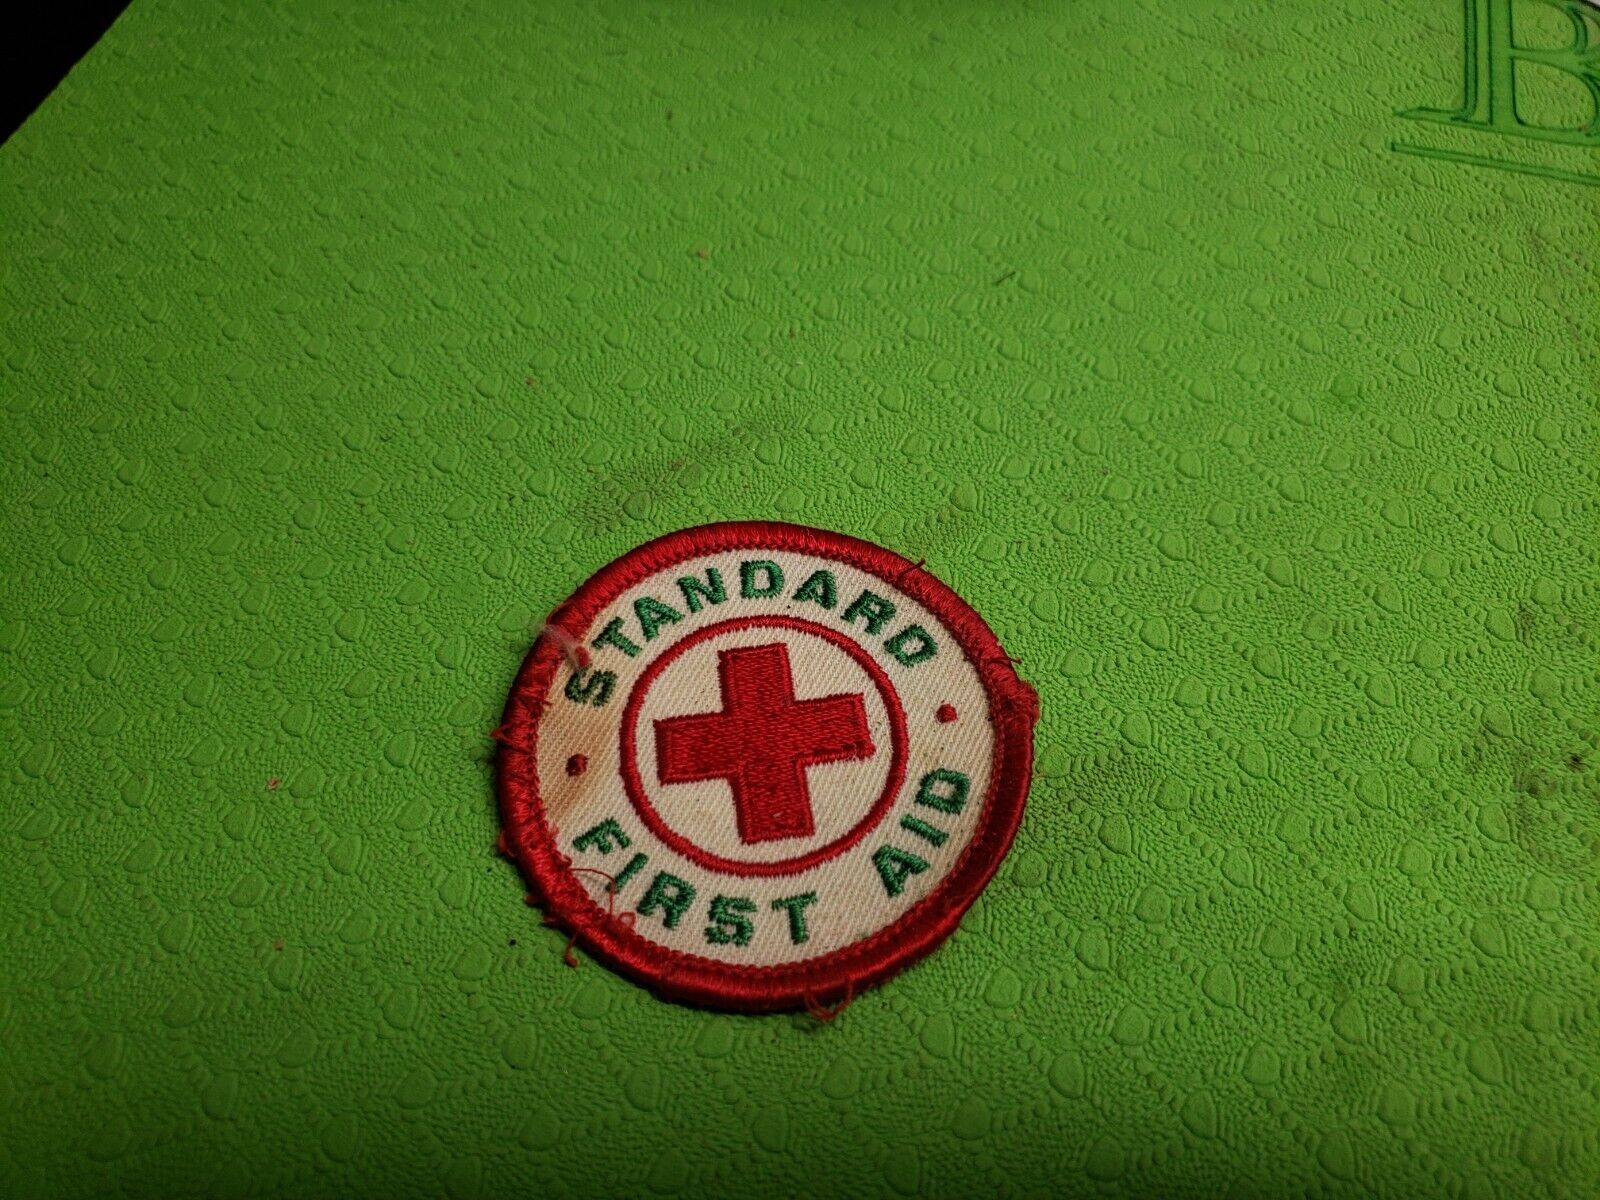 Vintage Standard First Aid Patch